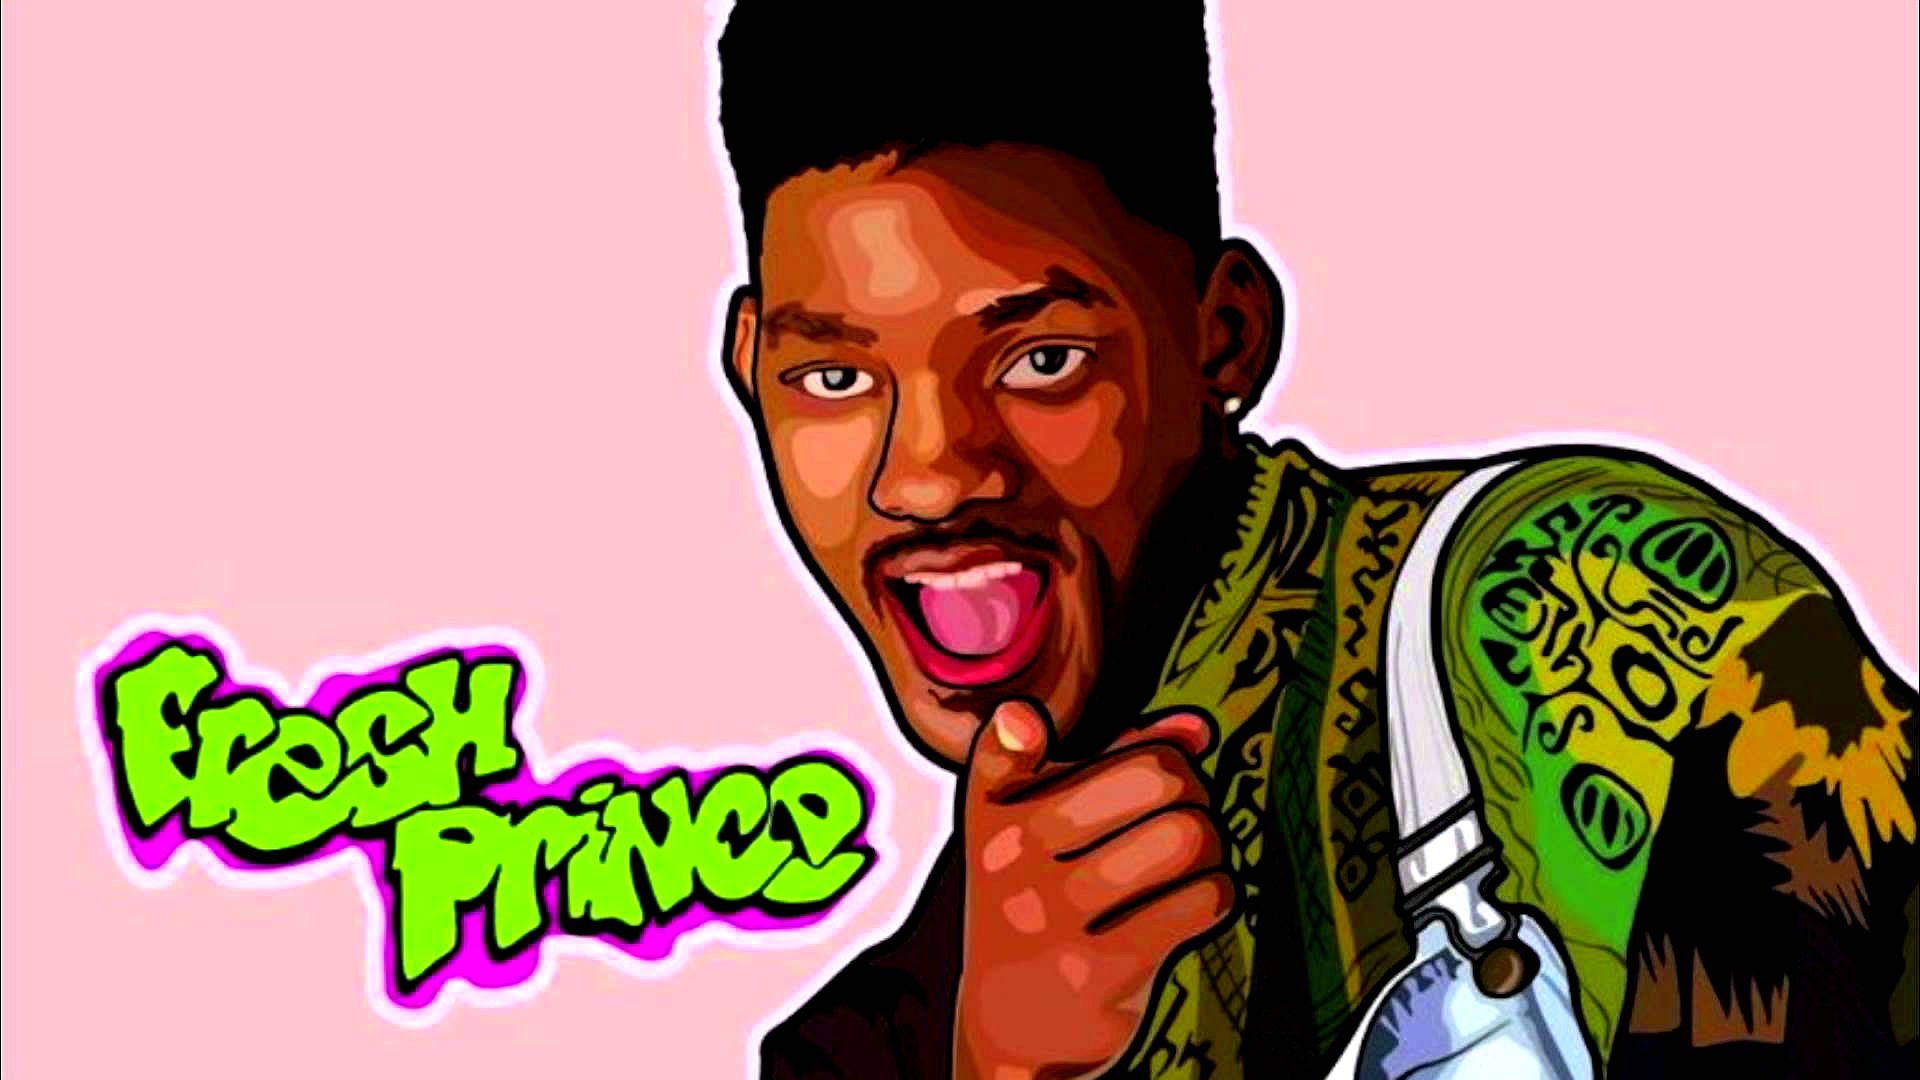  television will smith fresh prince bel air poster wallpaper background